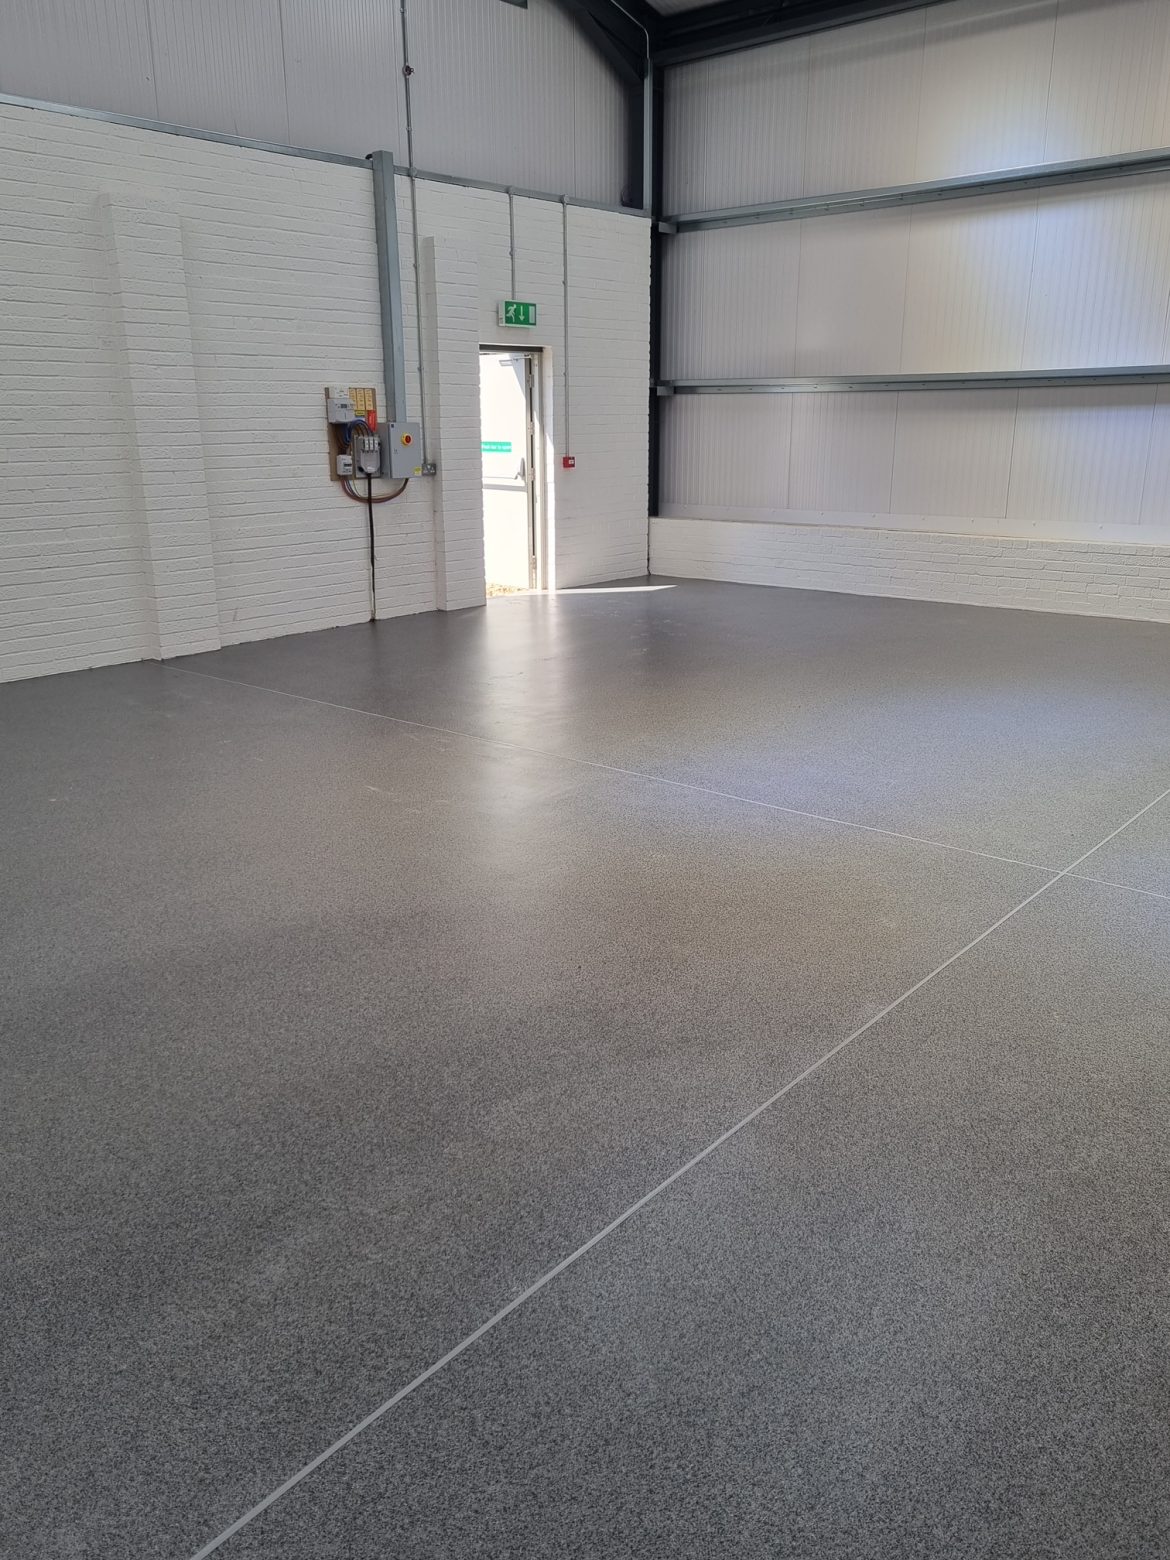 bespoke Resin Flooring Contractor in large open flooring area. When you need reliable, efficient and safe resin flooring contractors, RESYN should be top of your list providing seamless surfacing soltuons